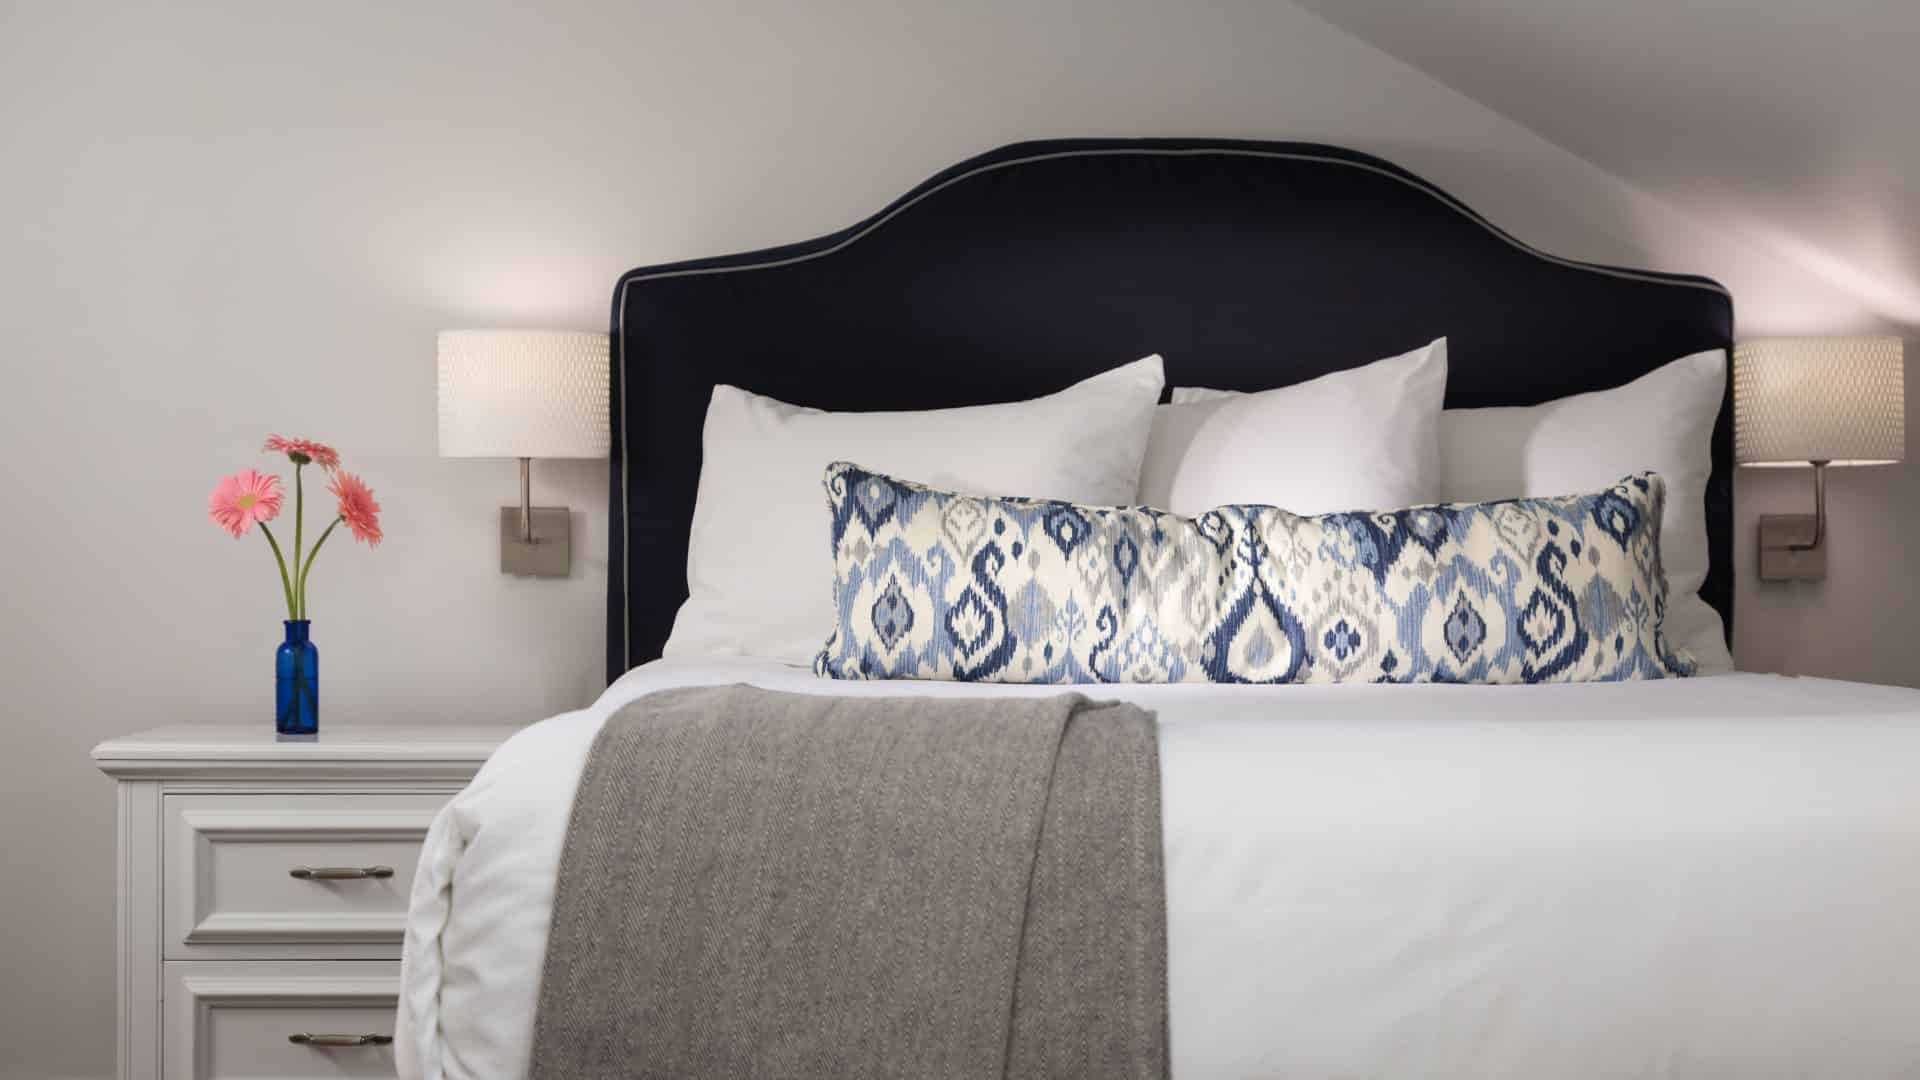 Bedroom with white walls, navy upholstered headboard, white bedding, white side table, and wall-mounted sconces